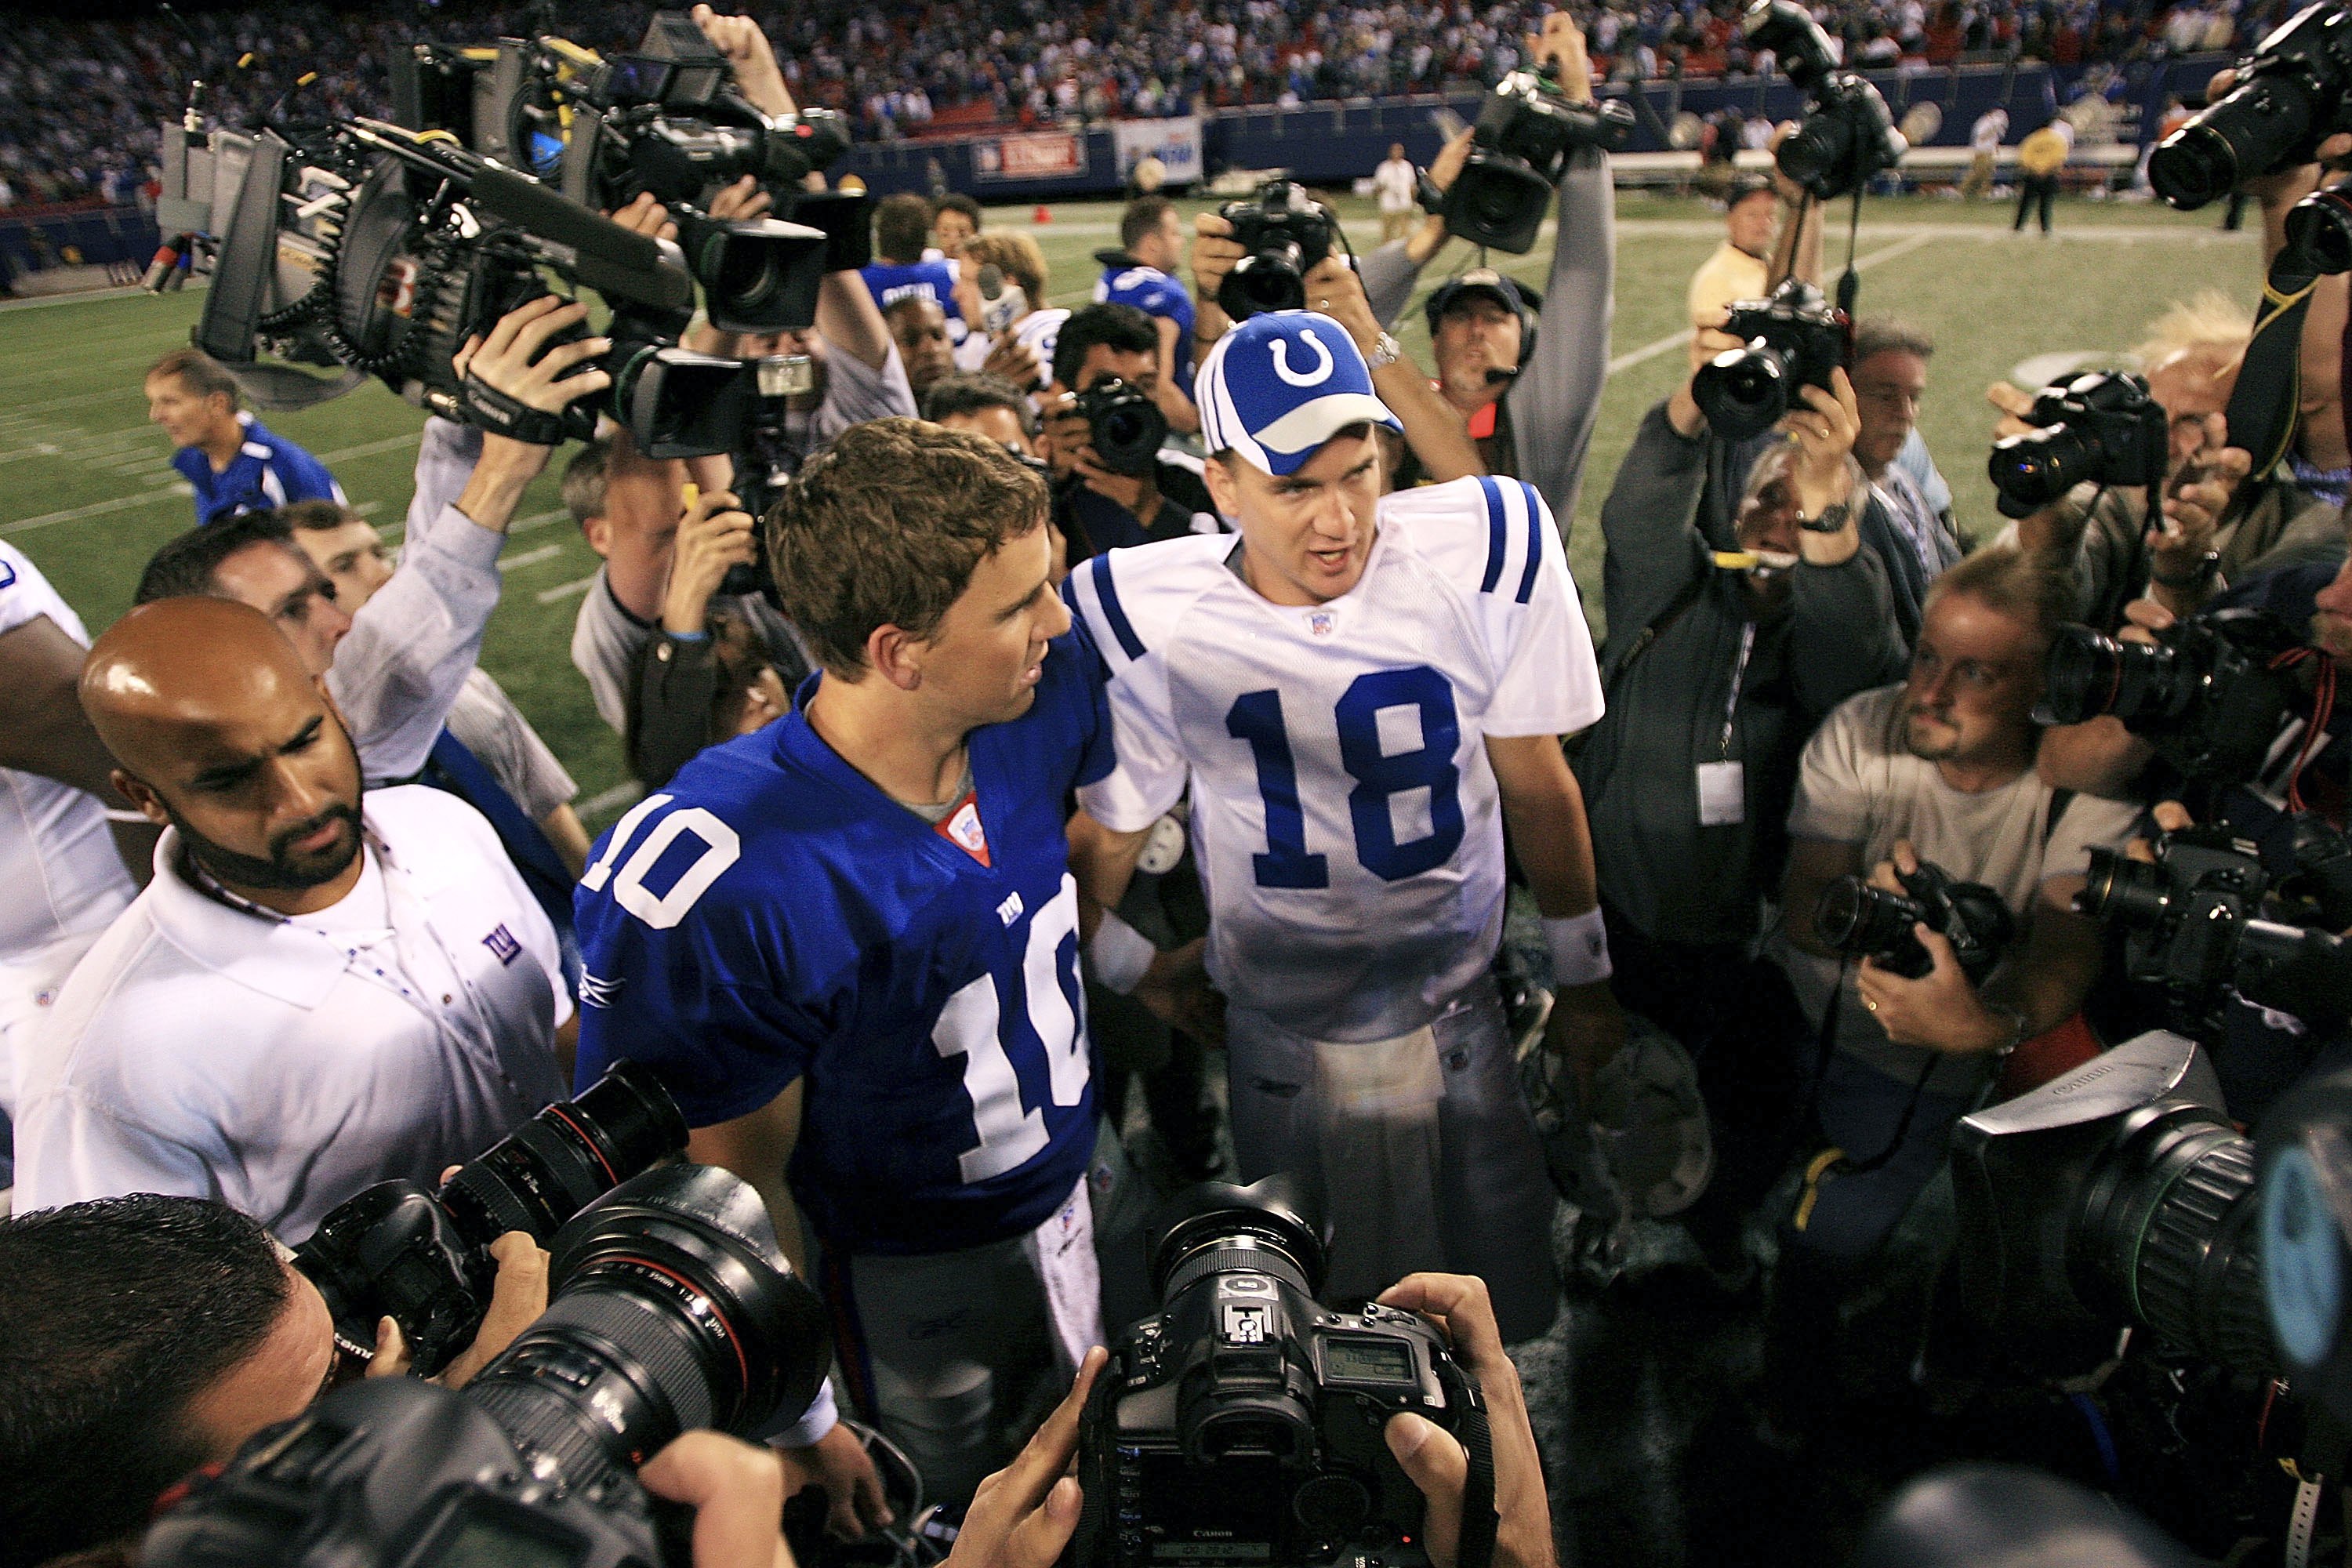 Eli Manning hopes Peyton can “go out on top” if Super Bowl 50 is